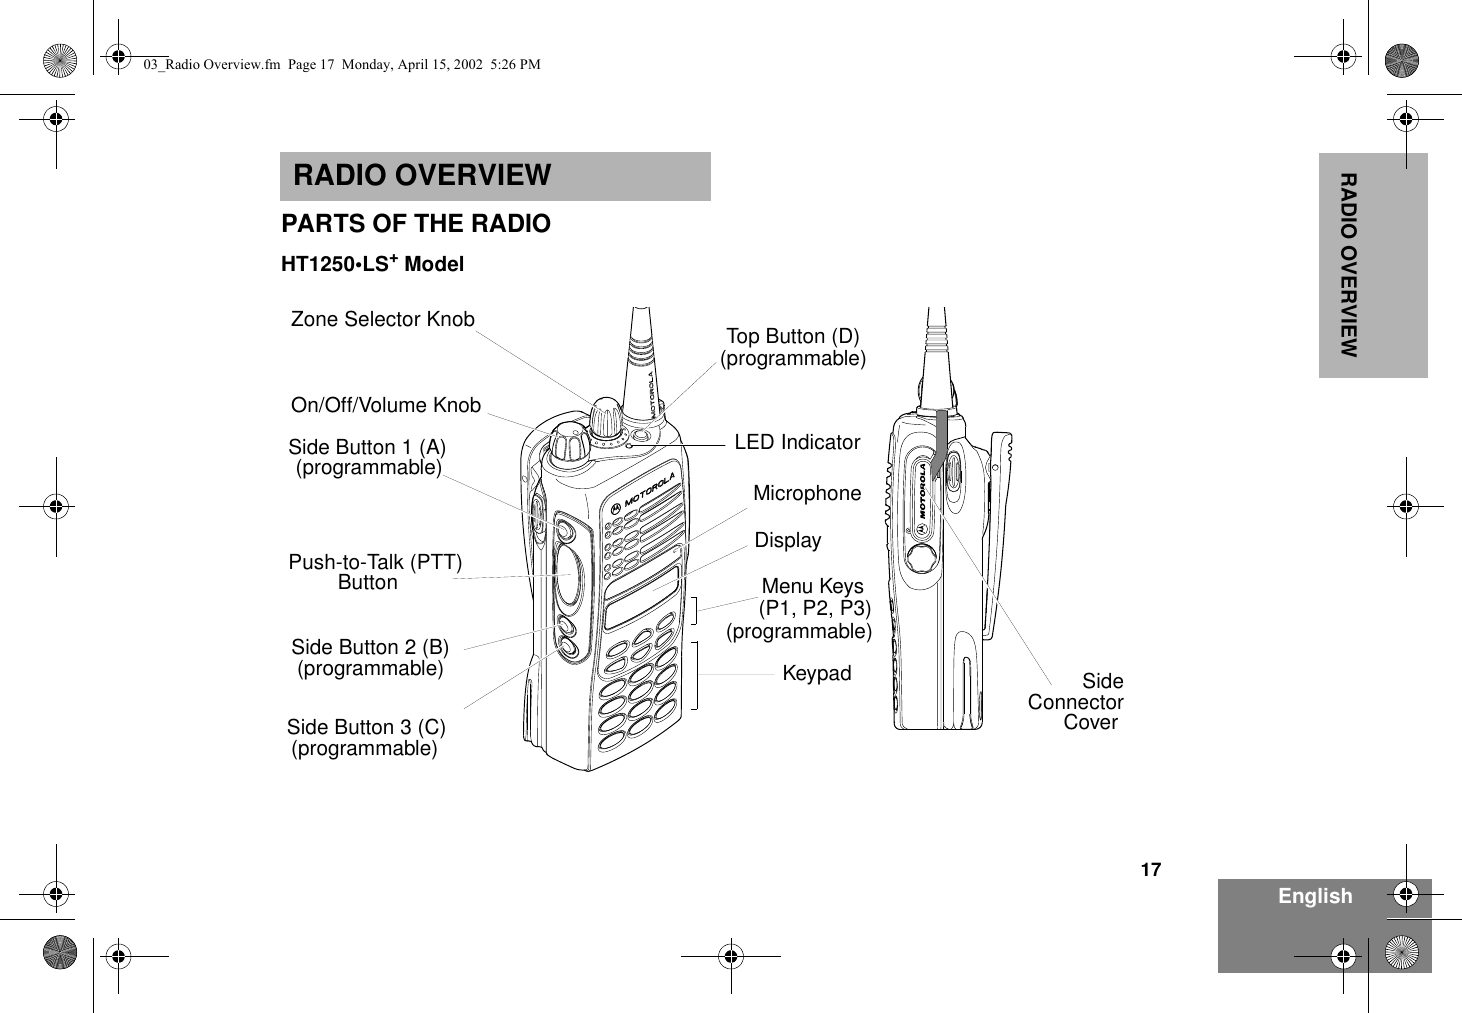 17EnglishRADIO OVERVIEW                                                                                                                                                                                                                                                                                                                                                                                                                                                                      RADIO OVERVIEWPARTS OF THE RADIOHT1250•LS+ Model On/Off/Volume KnobDisplayMicrophoneKeypadMenu Keys (programmable)Side Button 1 (A)Push-to-Talk (PTT) (programmable) Side Button 2 (B) (programmable)Side Button 3 (C) Zone Selector Knob(programmable)Top Button (D)Button(P1, P2, P3)(programmable)LED IndicatorSideConnectorCover 03_Radio Overview.fm  Page 17  Monday, April 15, 2002  5:26 PM